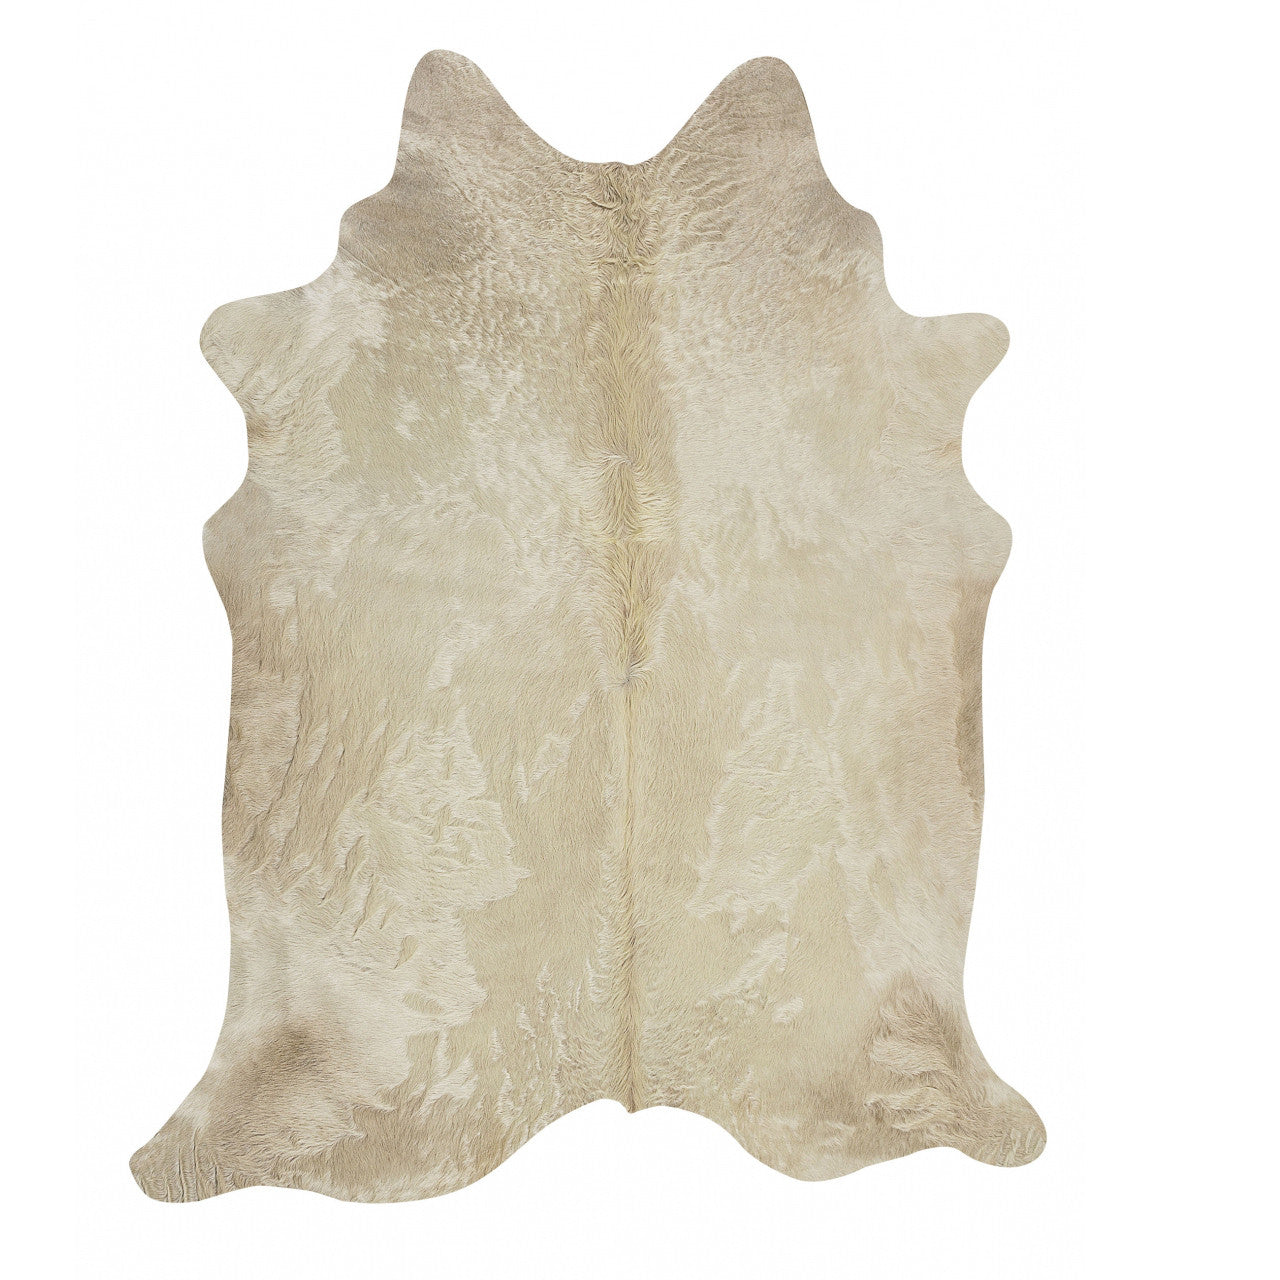 Light Champagne Cowhide Rug - Rodeo Cowhide Rugs